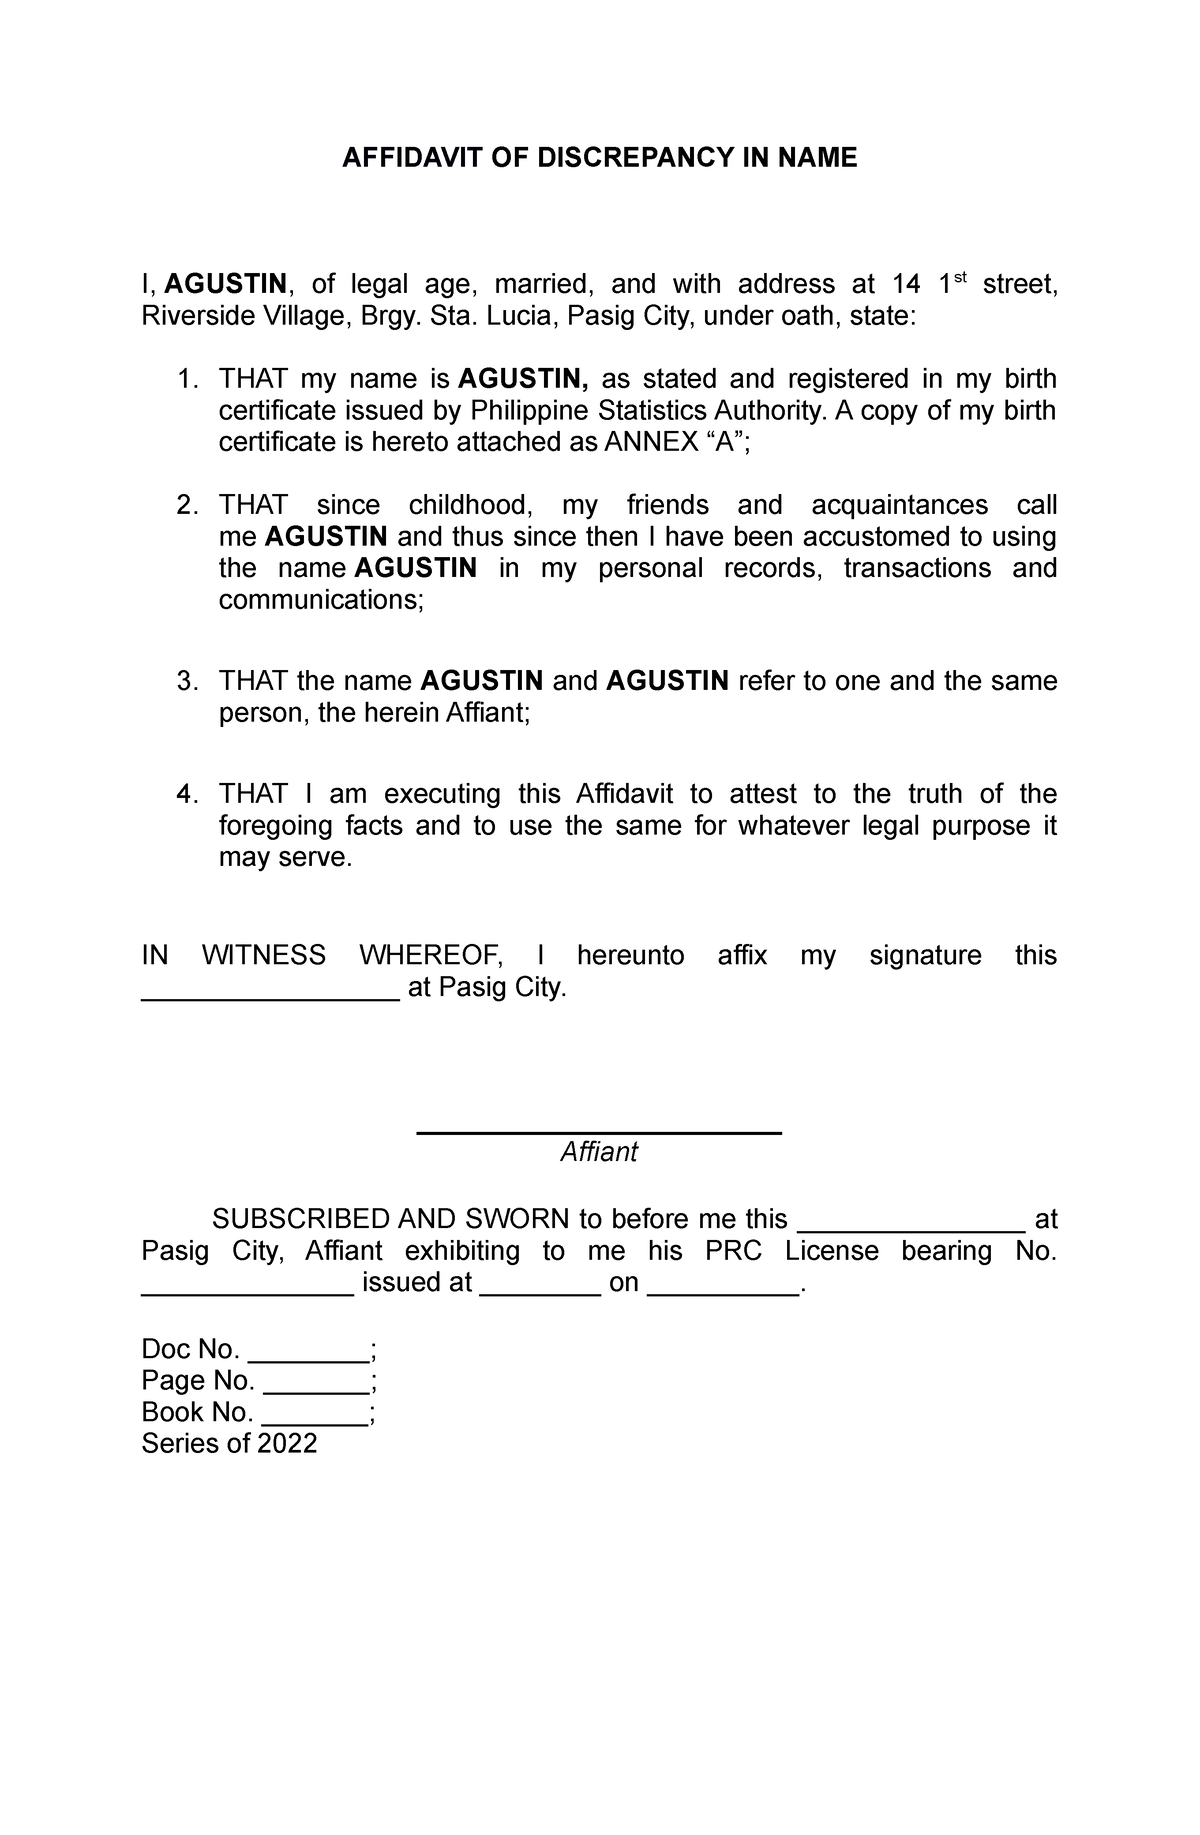 Affidavit Of Discrepancy Affidavit Of Discrepancy In Name I Agustin Of Legal Age Married 1059